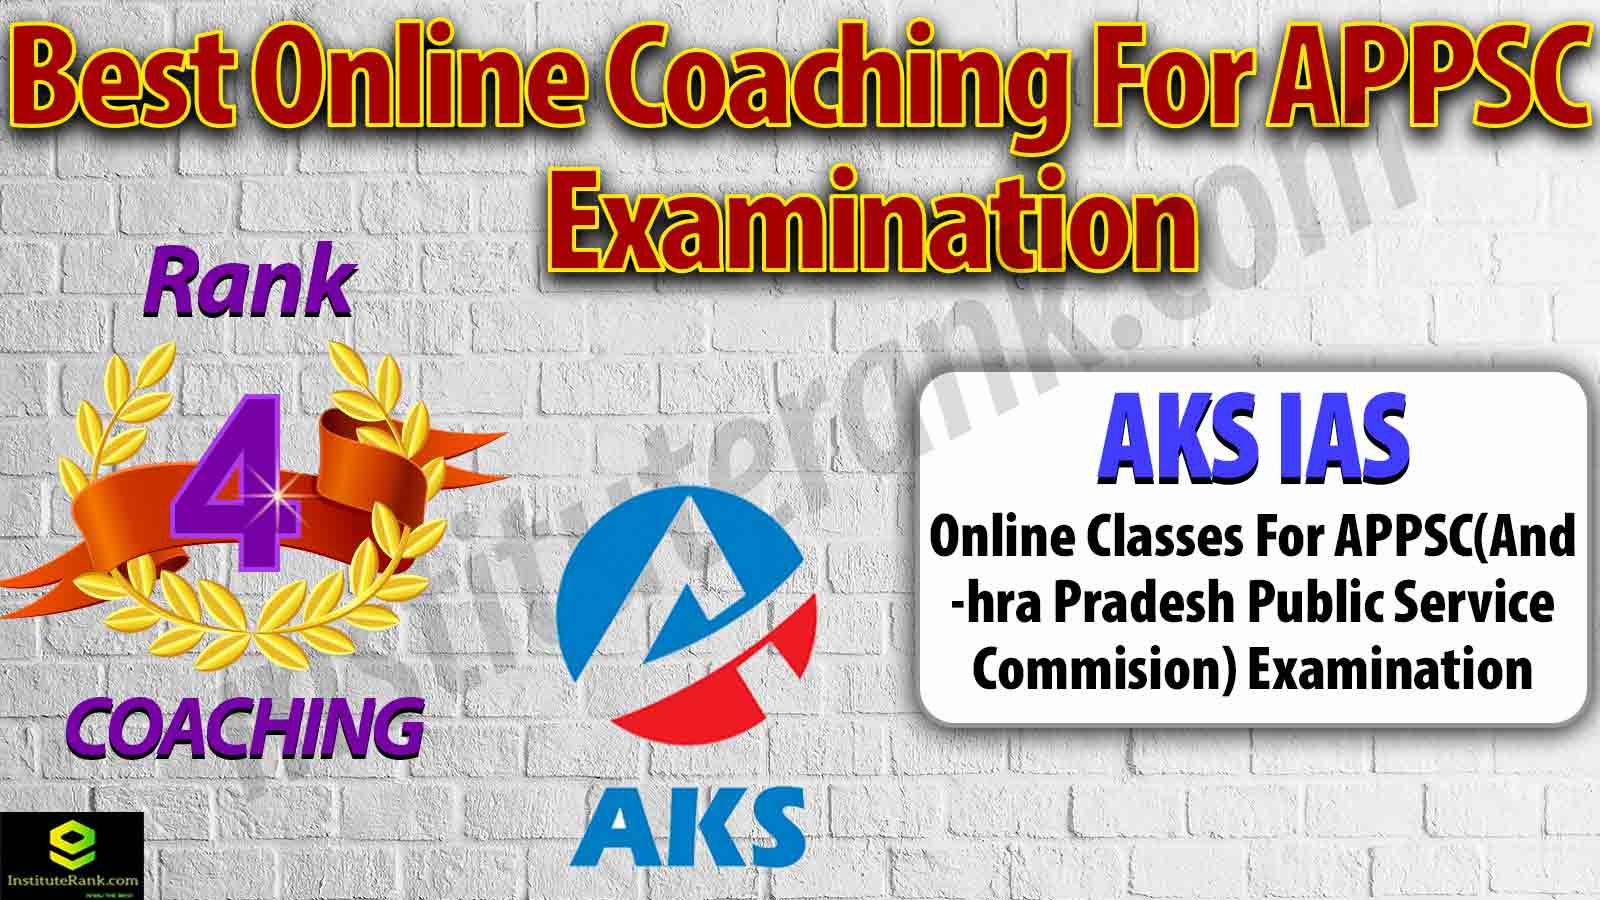 Best Online Coaching Preparation for APPSC Examination